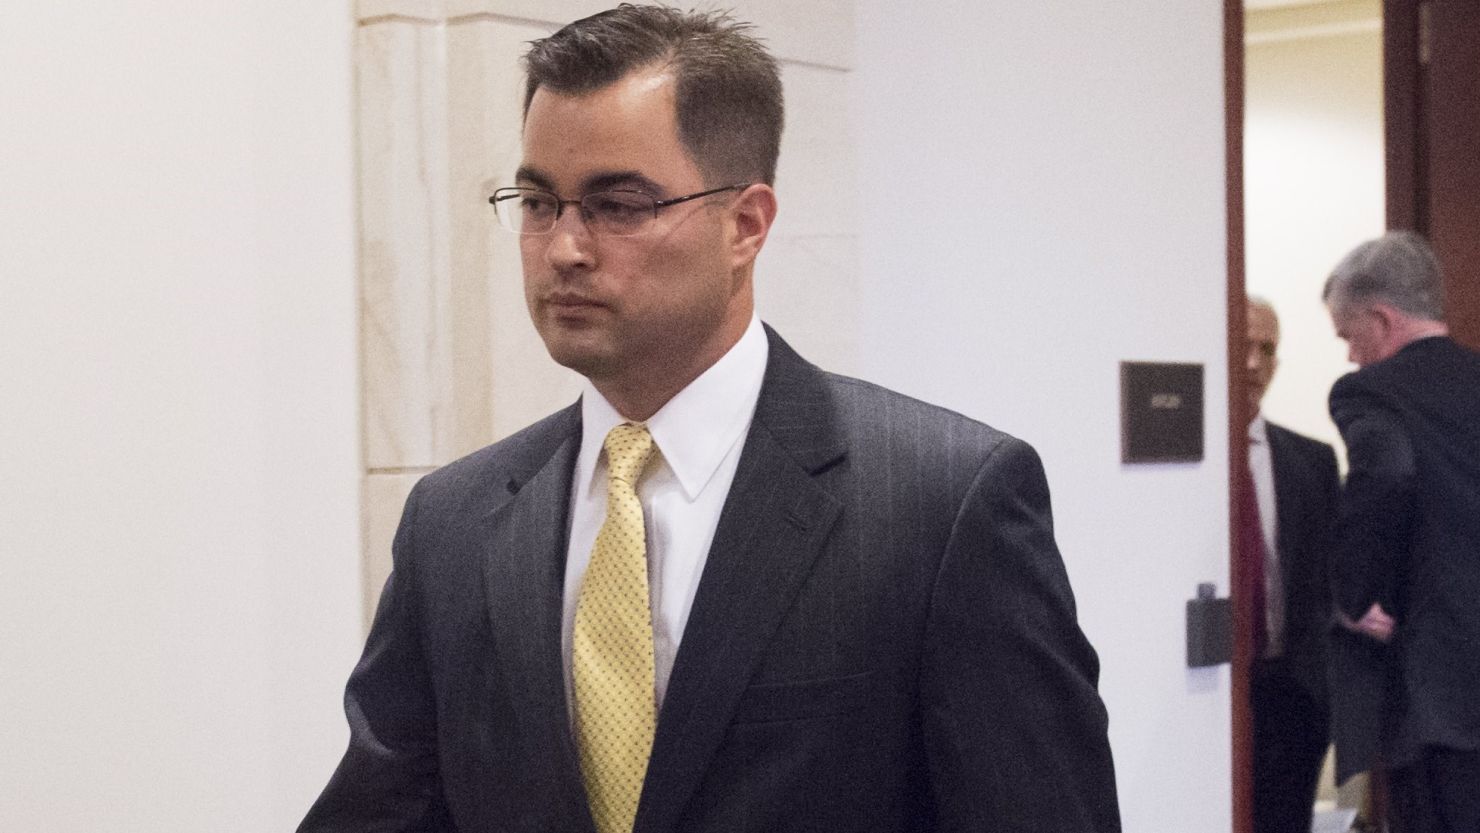 Bryan Pagliano, a former State Department employee who worked on former Secretary of State Hillary Clinton's private email server, leaves after invoking his Fifth Amendment right against self-incrimination before the House Select Committee on Benghazi on Capitol Hill in Washington on September 10, 2015.